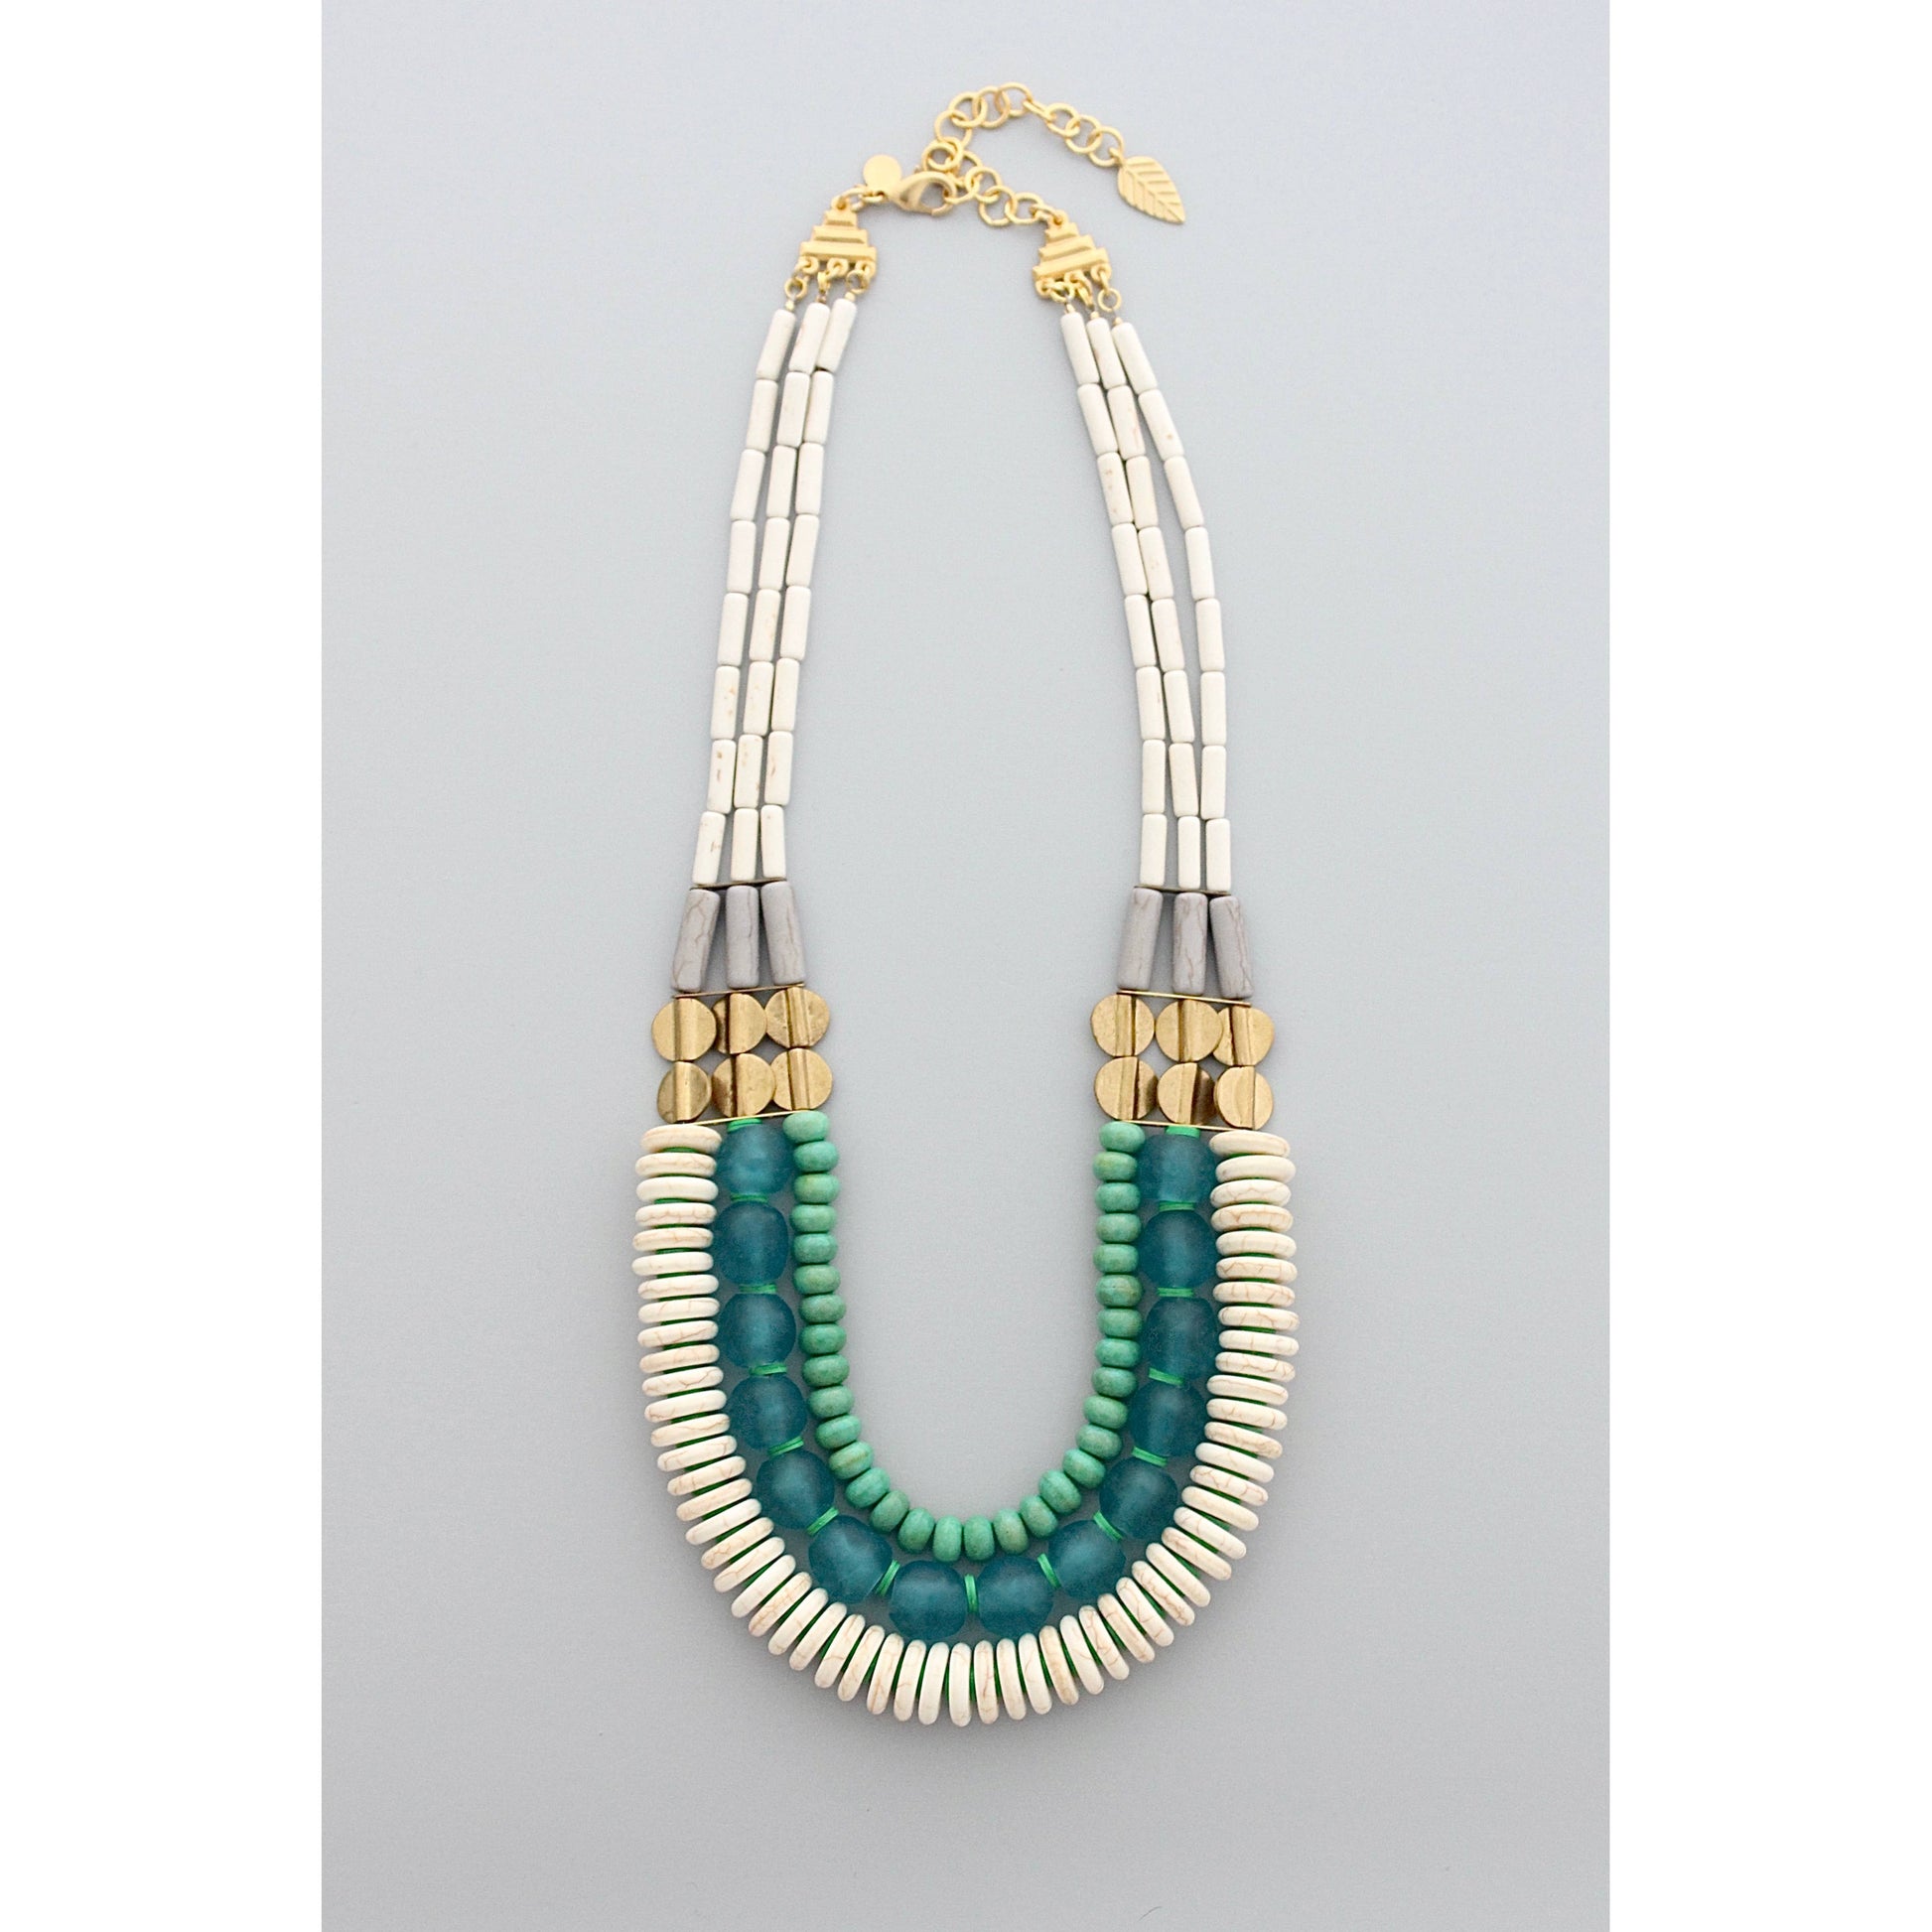 20" triple strand necklace with magnesite, turquoise, vinyl, brass, and Ghana glass against a grey background